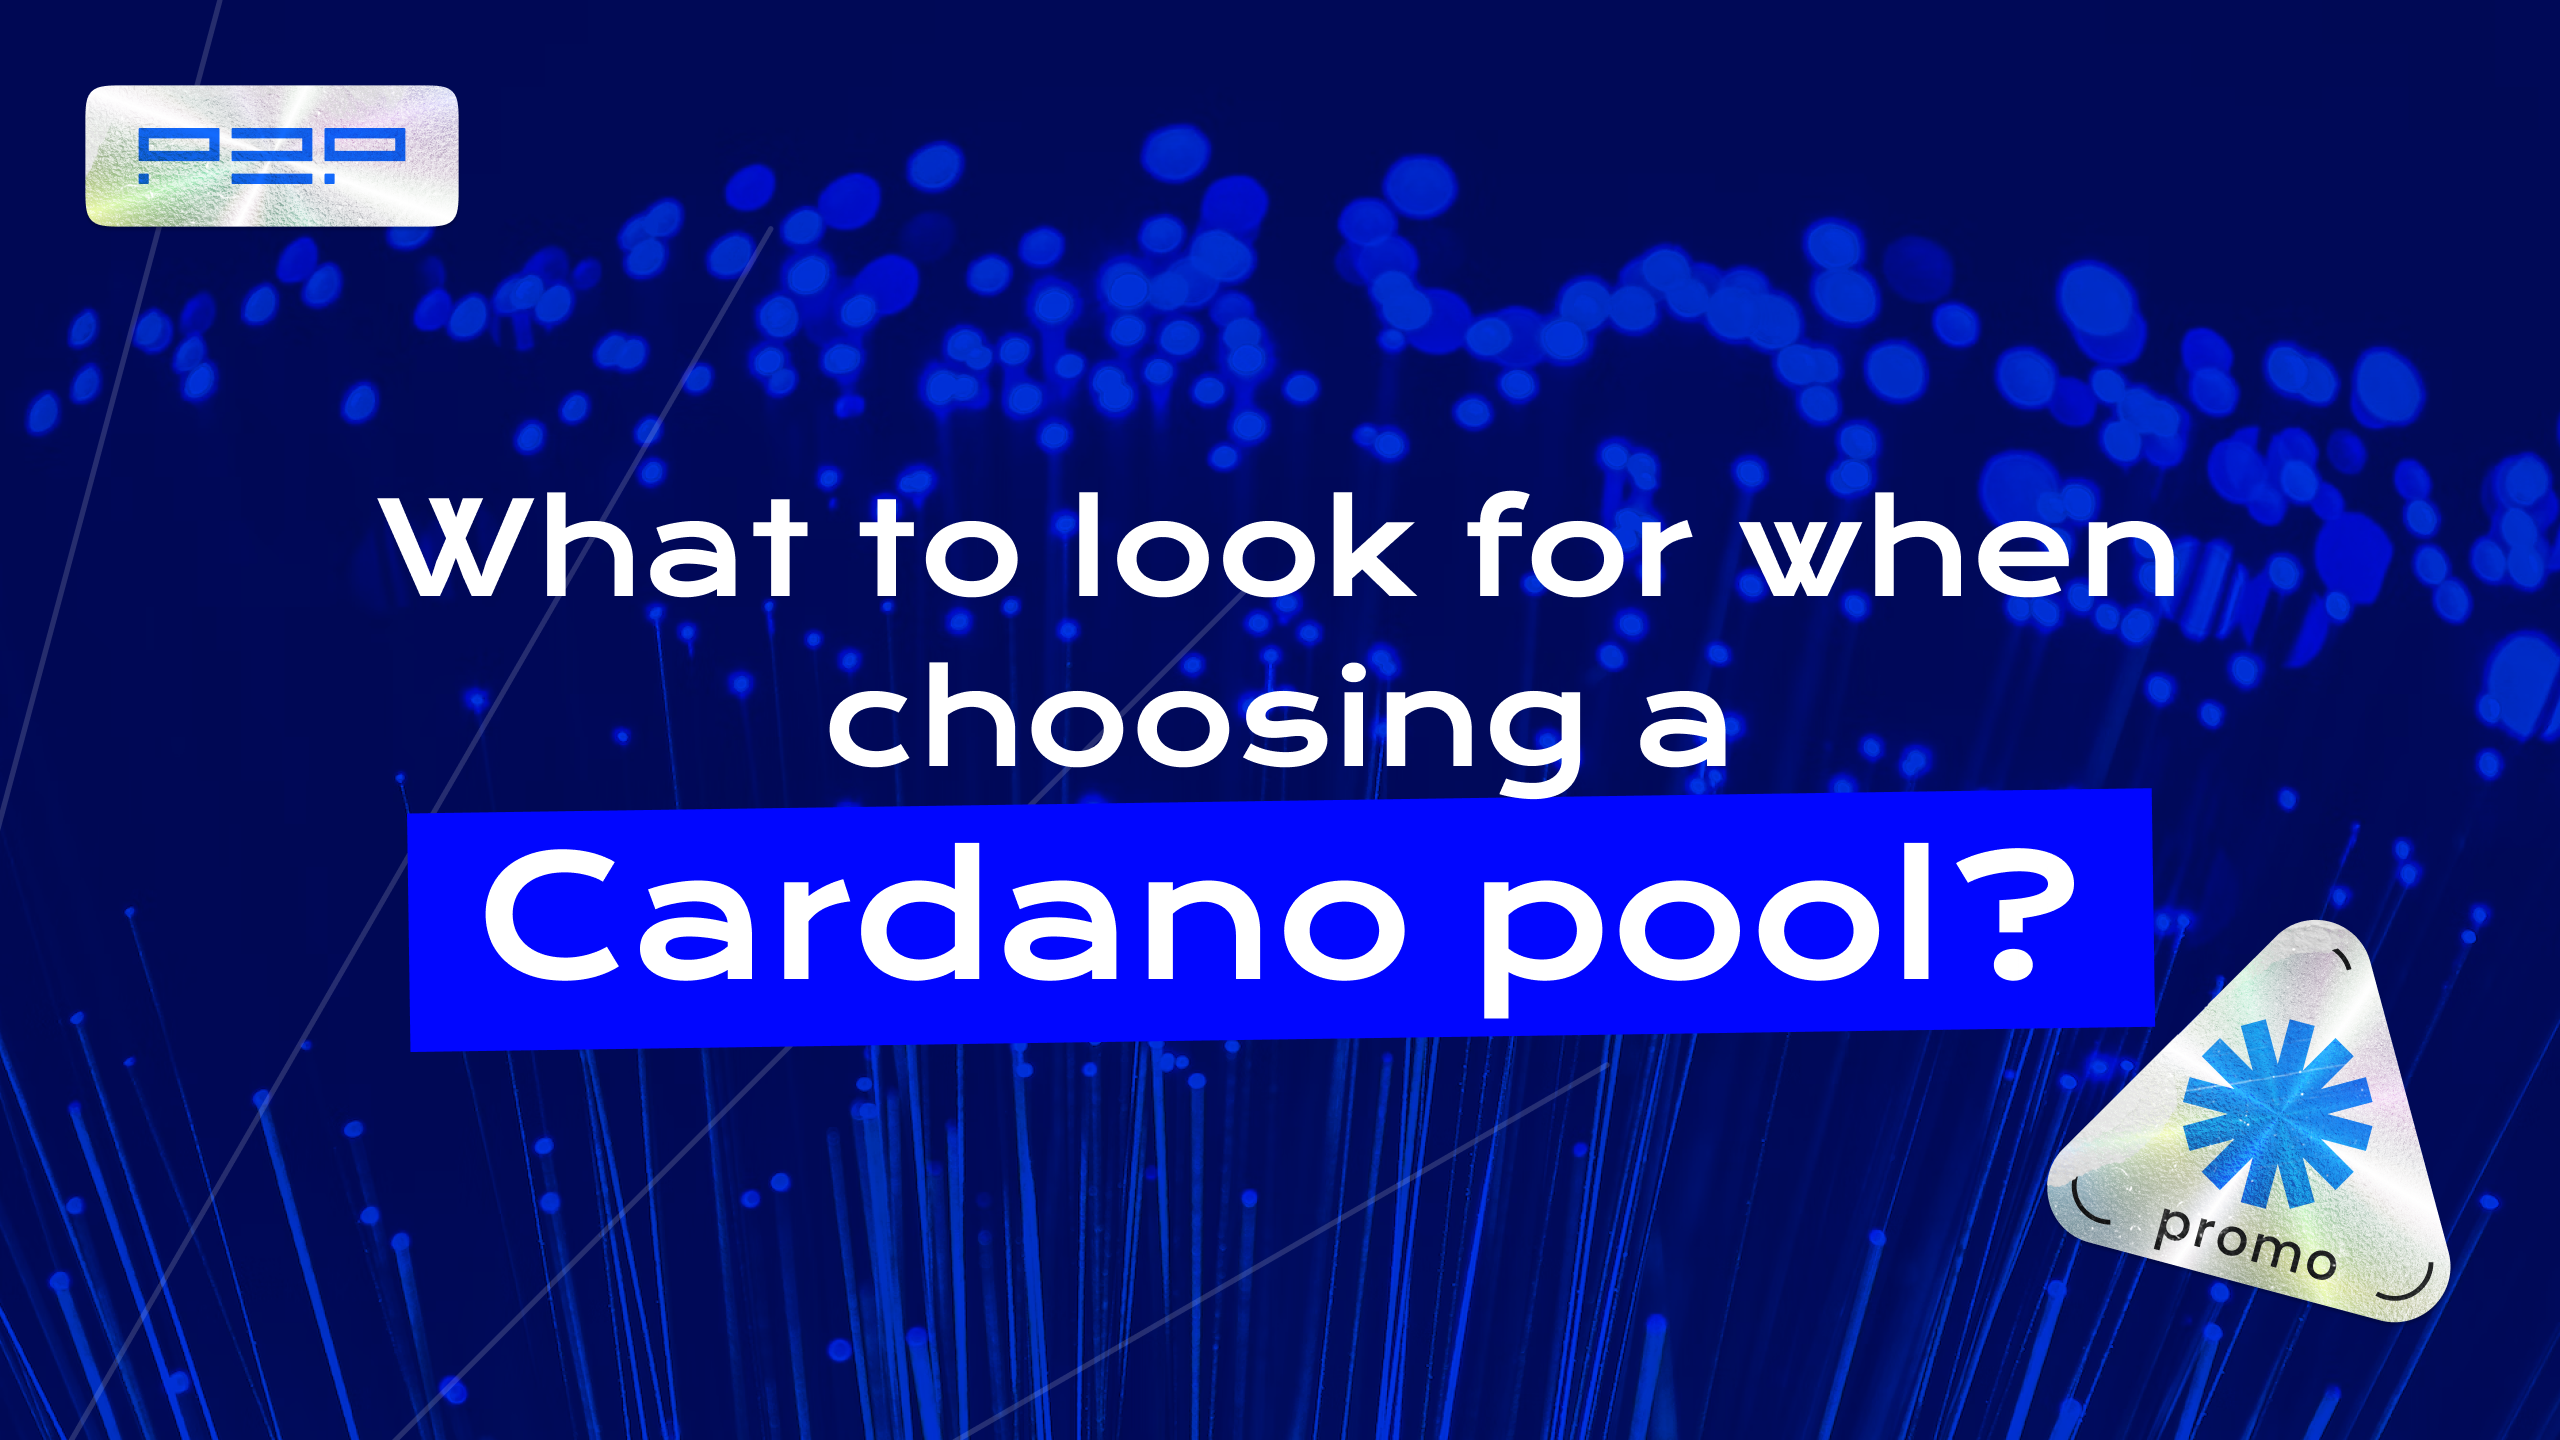 What to look for when choosing a Cardano pool?